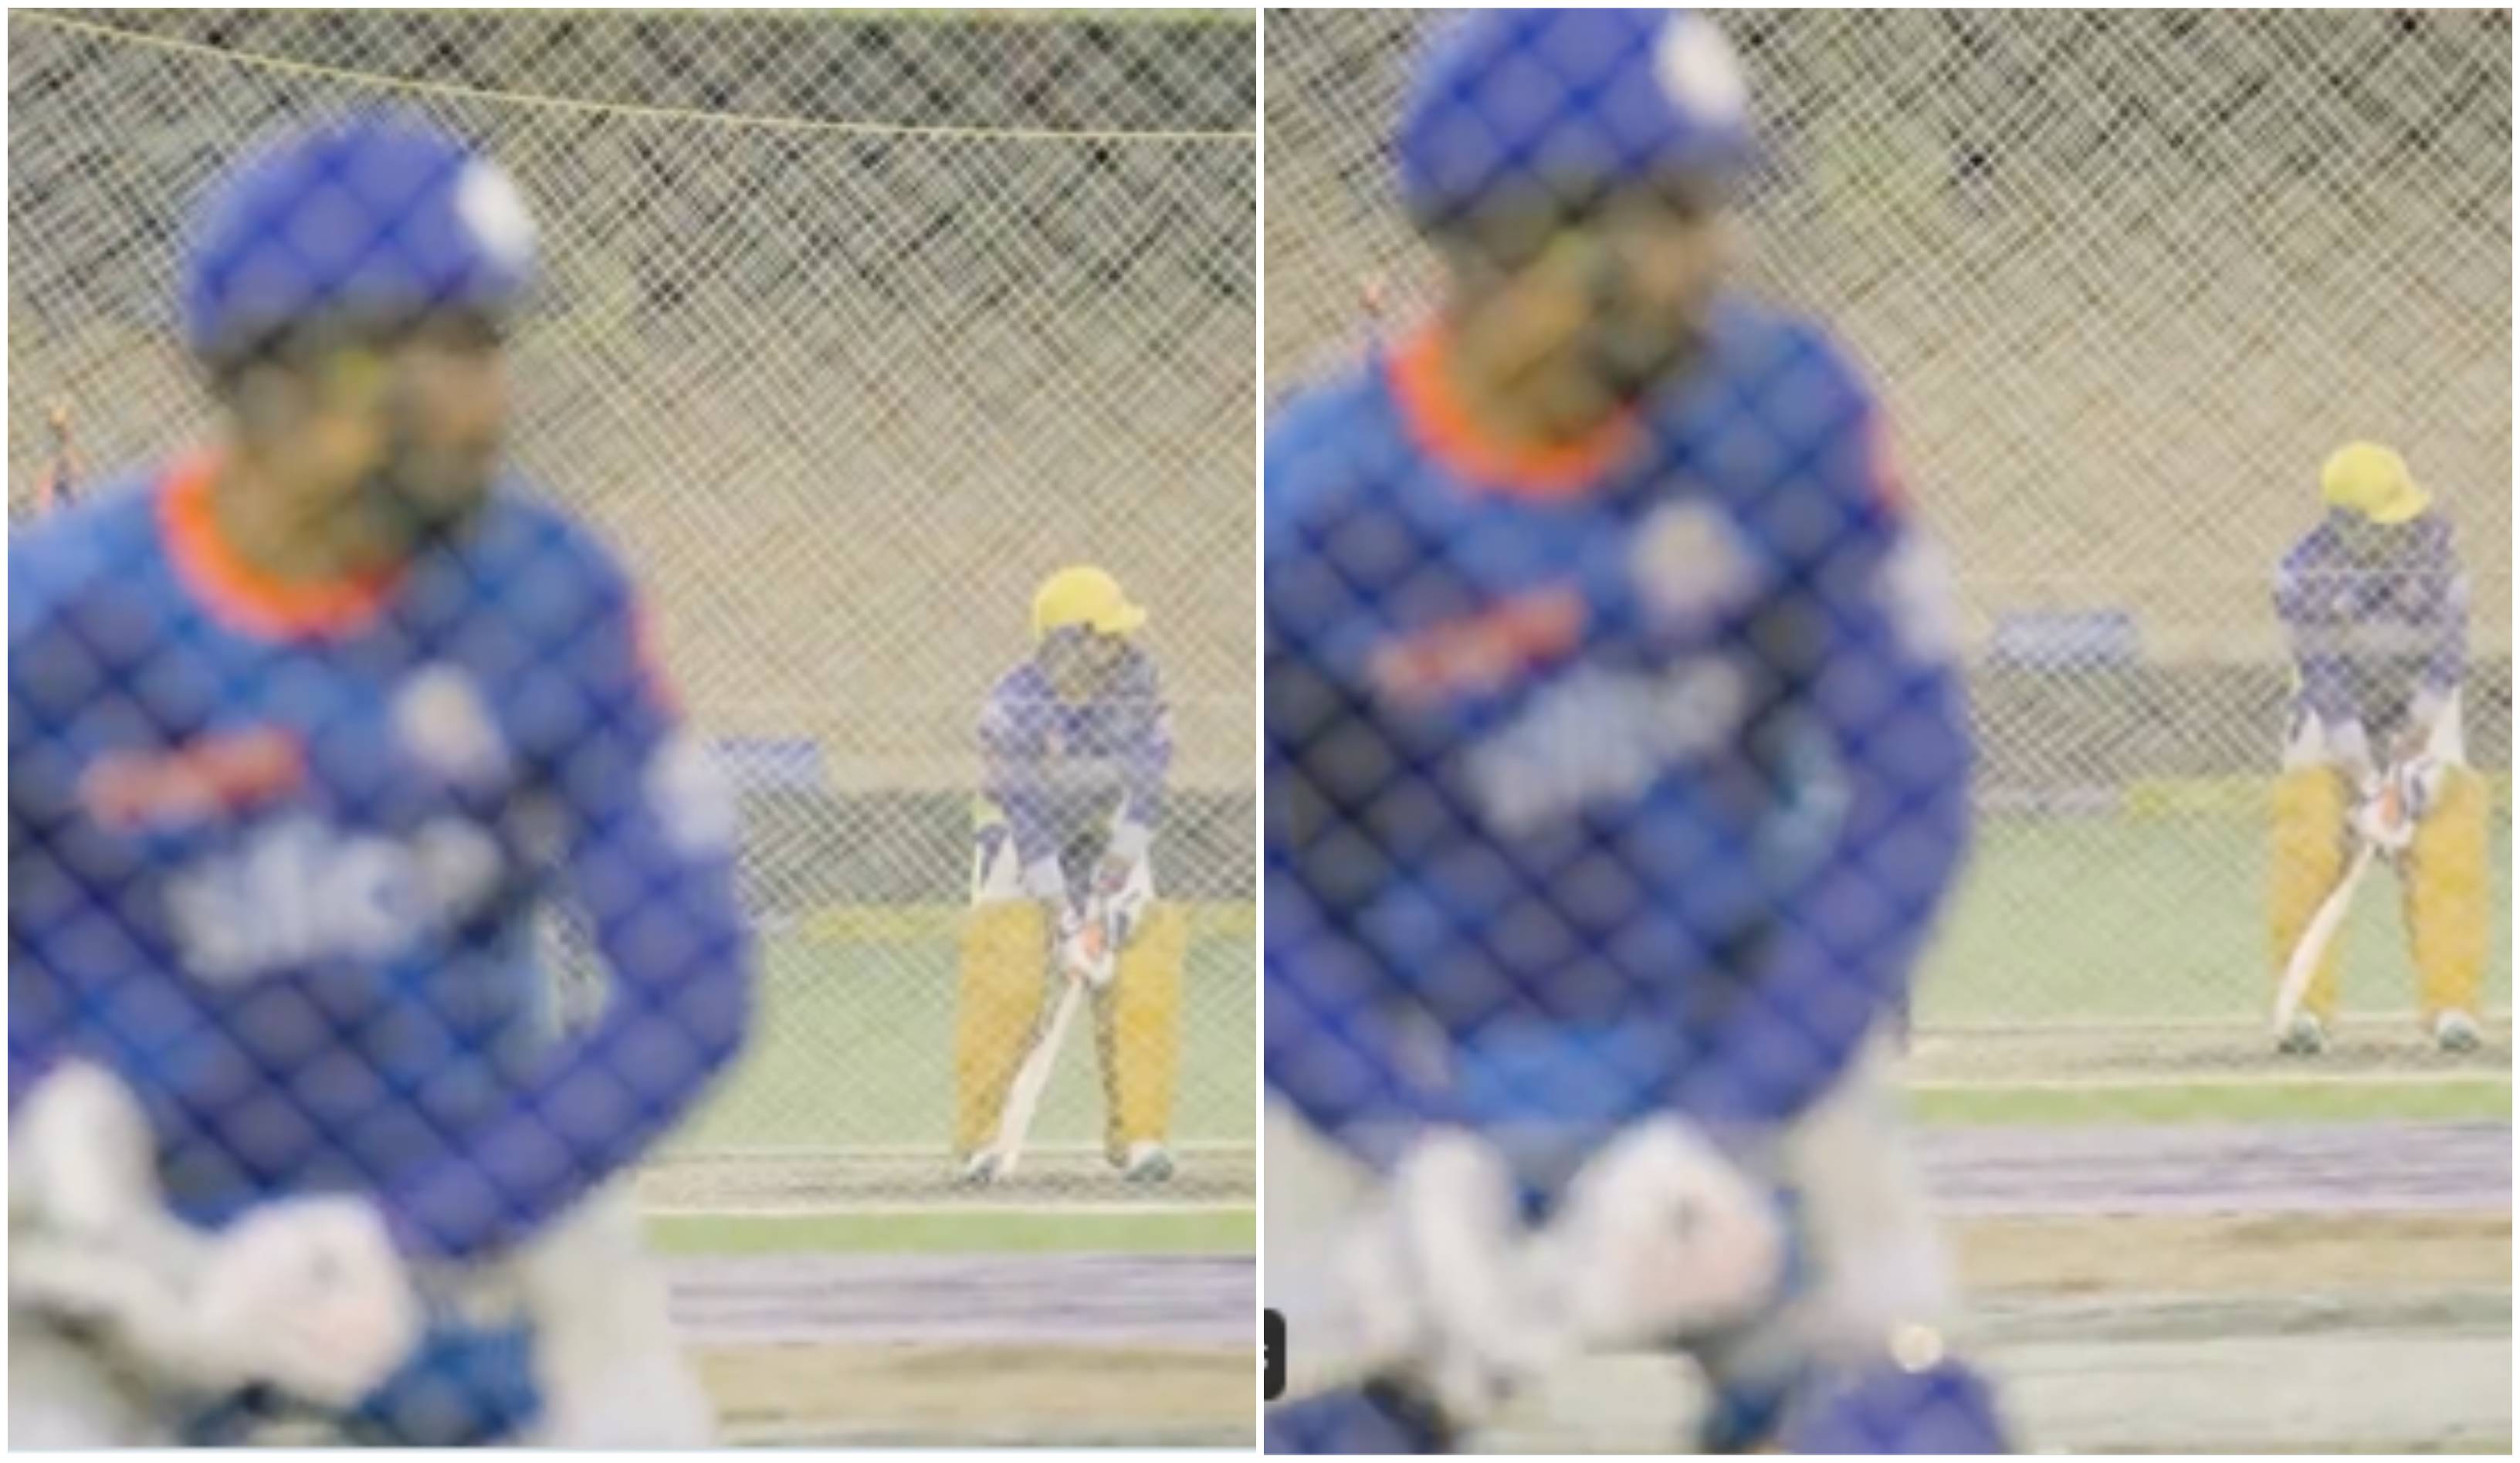 Rohit Sharma and MS Dhoni batting in their respective nets during the training session | MI/Twitter